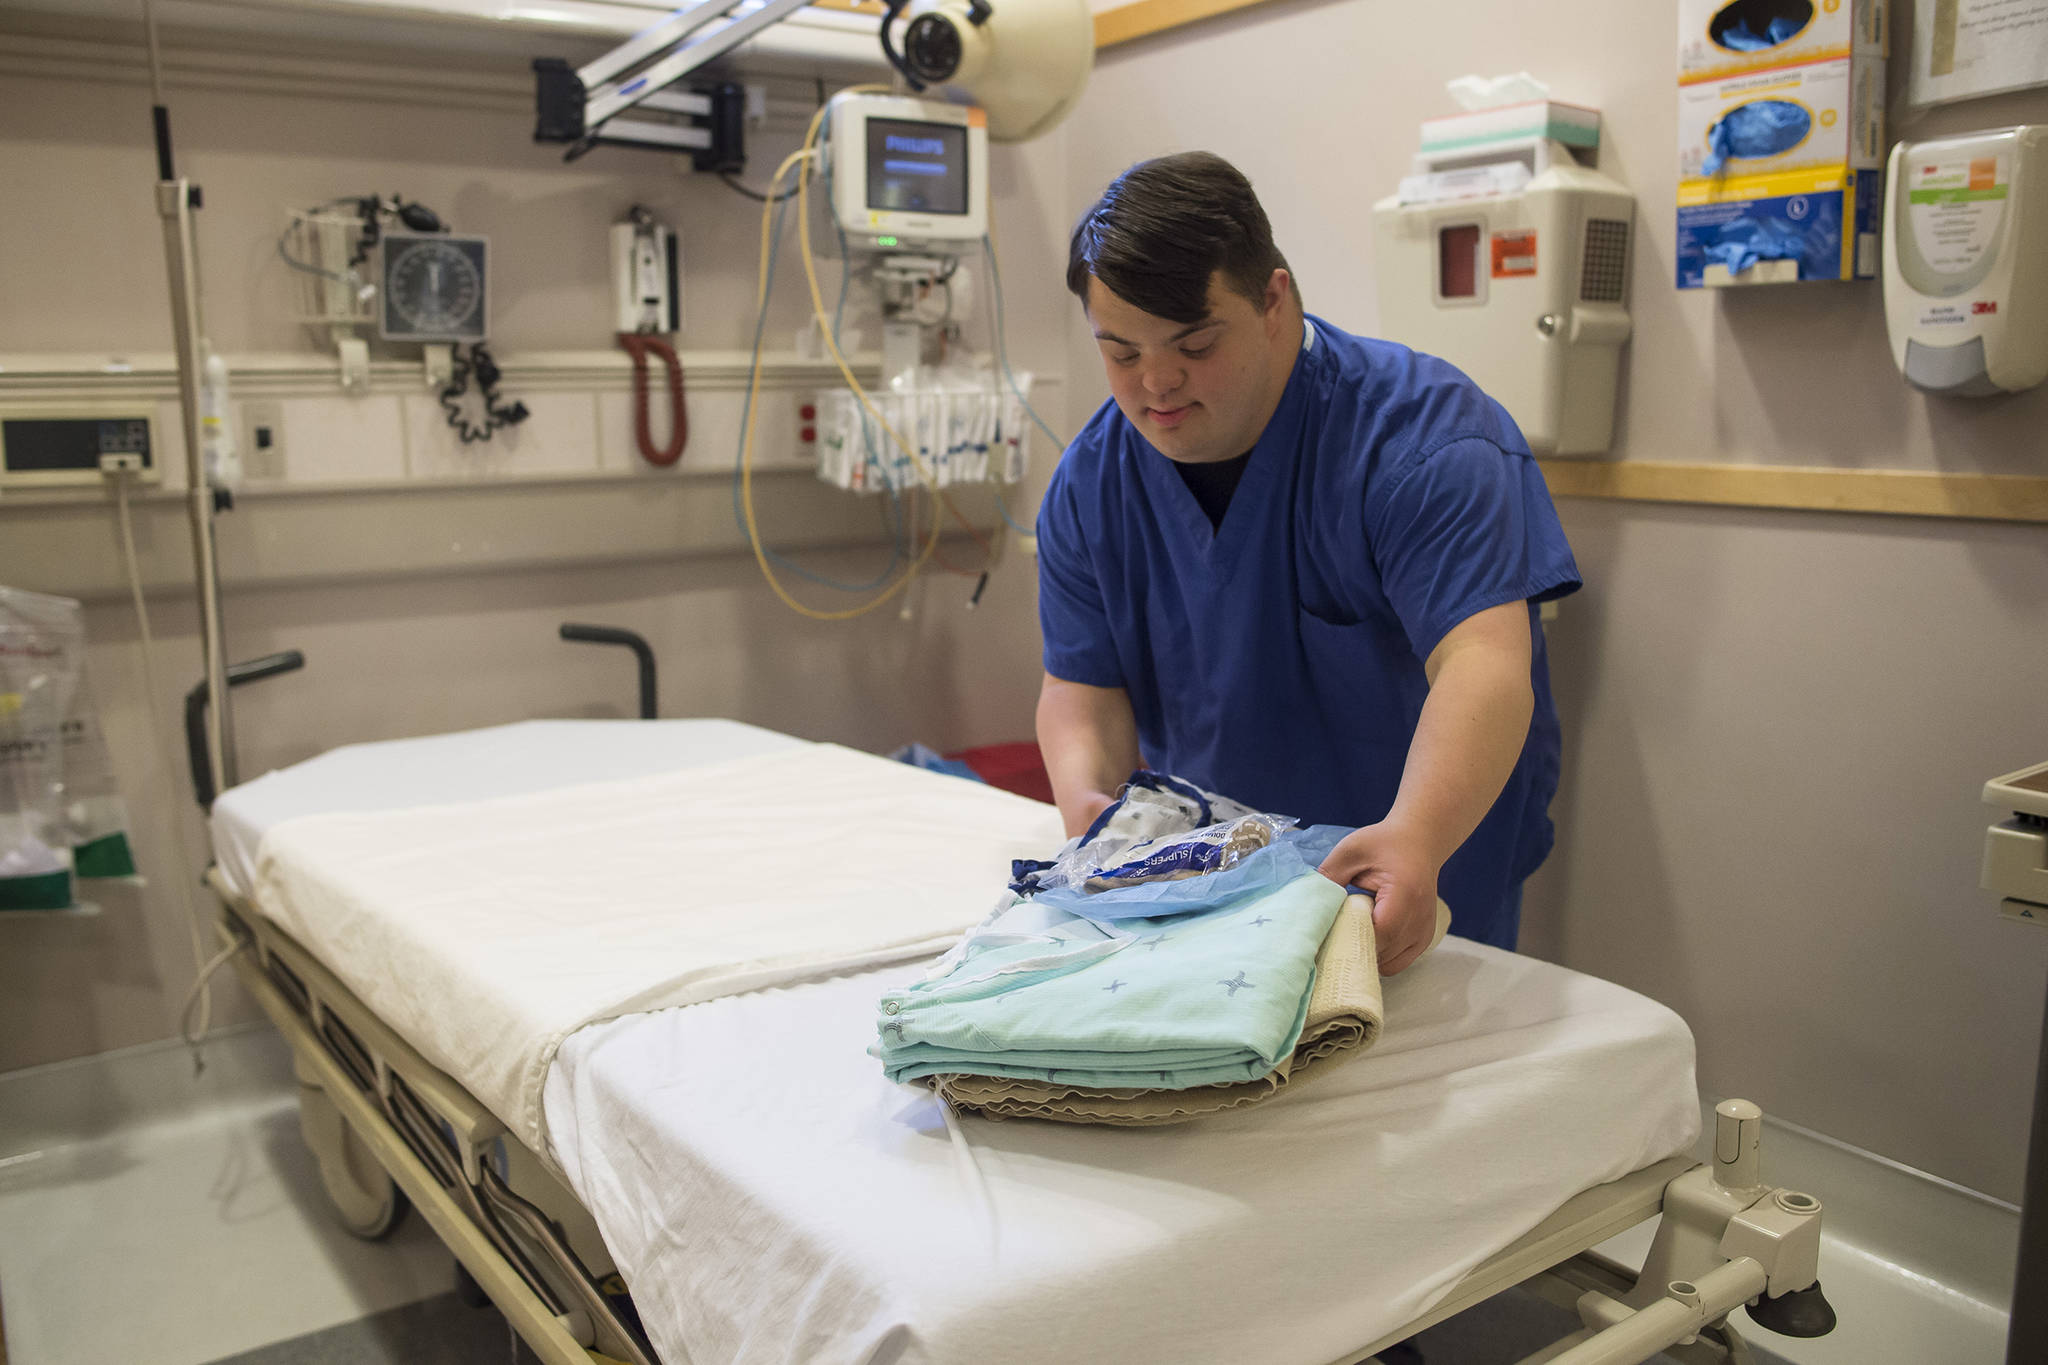 Solomon Dunlap cleans and makes up beds in the day surgery department as part of his internship at Bartlett Regional Hospital on Friday, Oct. 5, 2018. (Michael Penn | Juneau Empire)